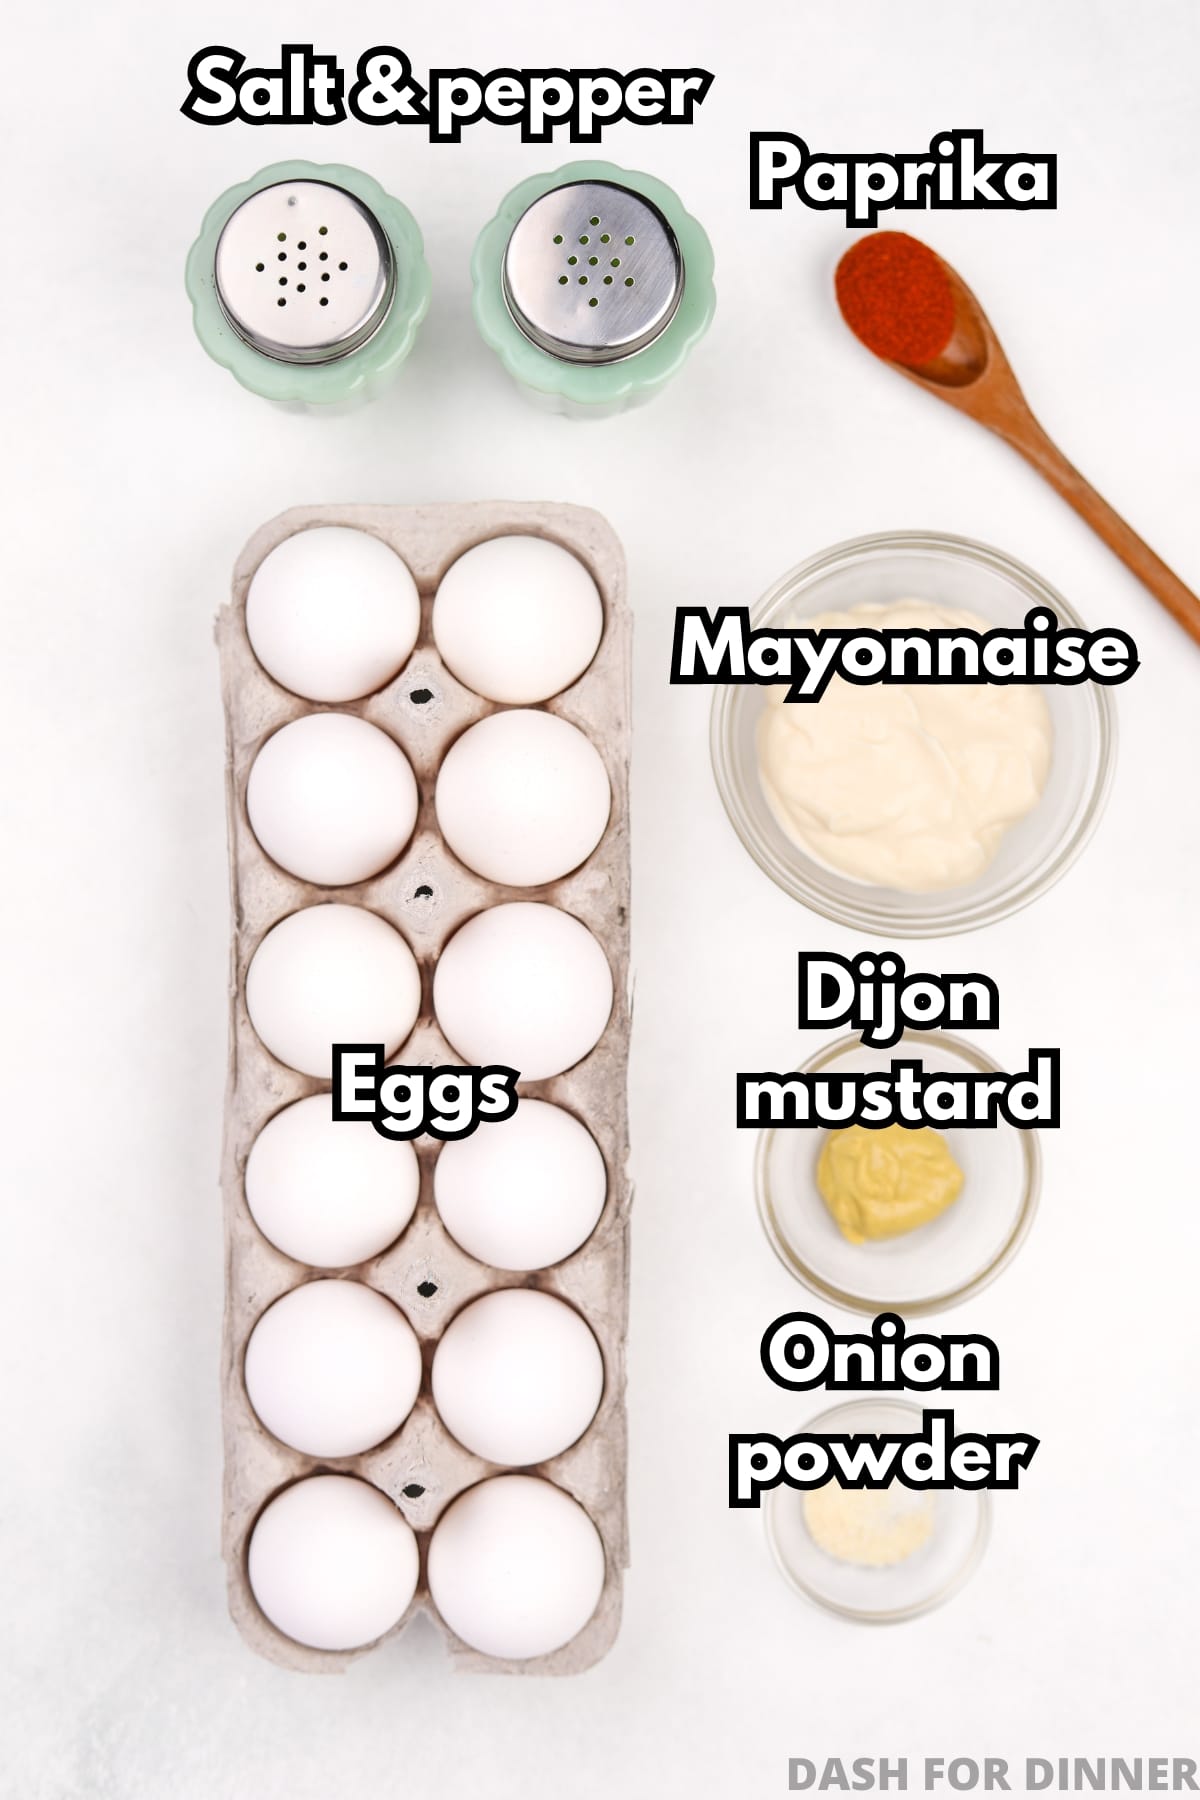 The ingredients needed to make deviled eggs, including mayo, dijon mustard, salt, pepper, and paprika.